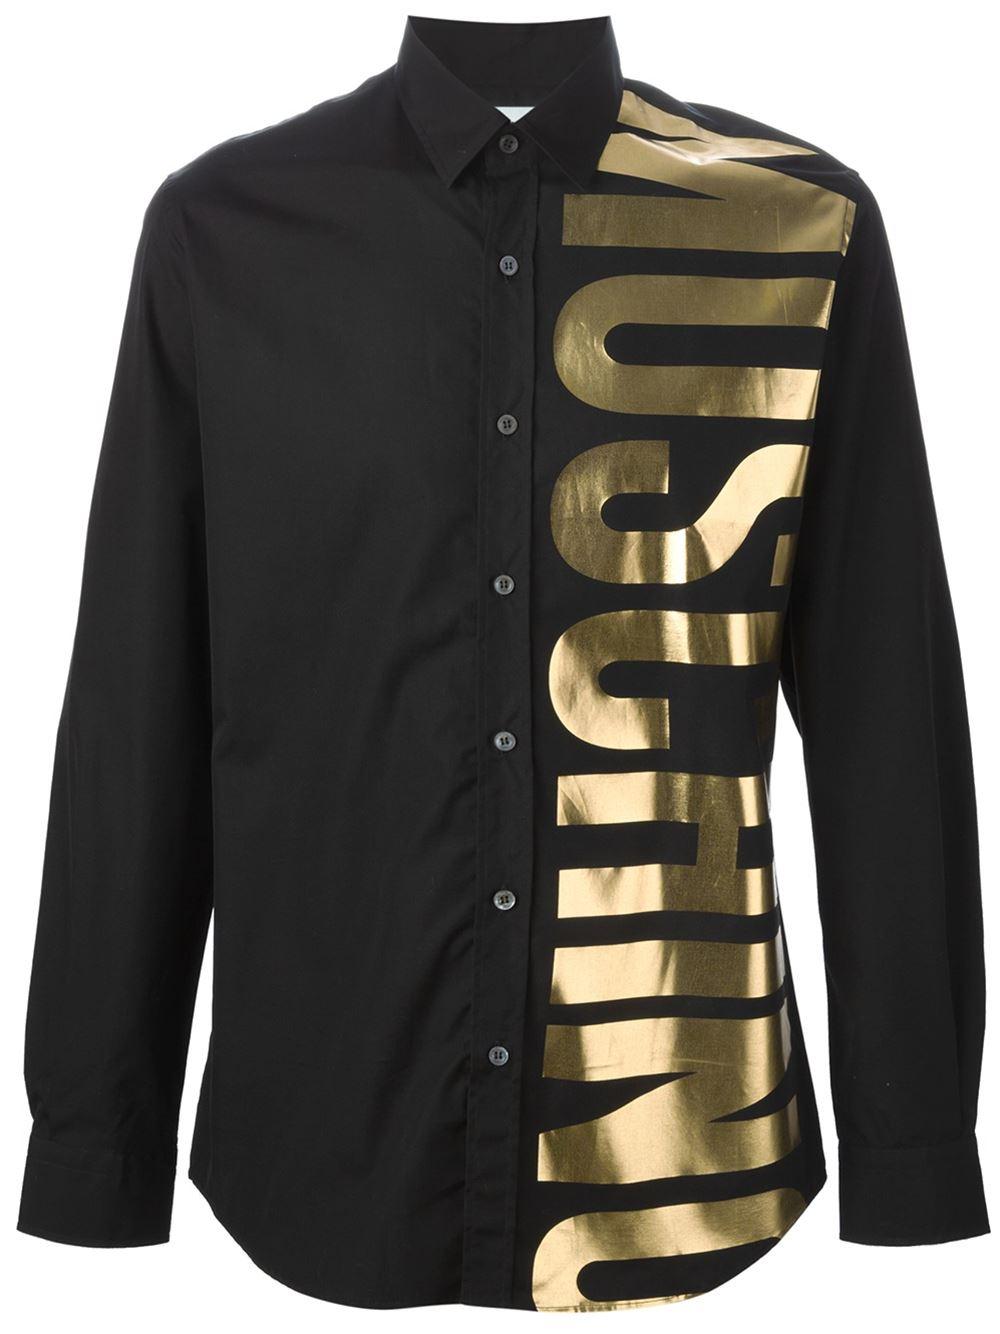 Moschino Gold Logo - Rapper French Montana Parties In A Moschino Gold Logo Long-Sleeve ...